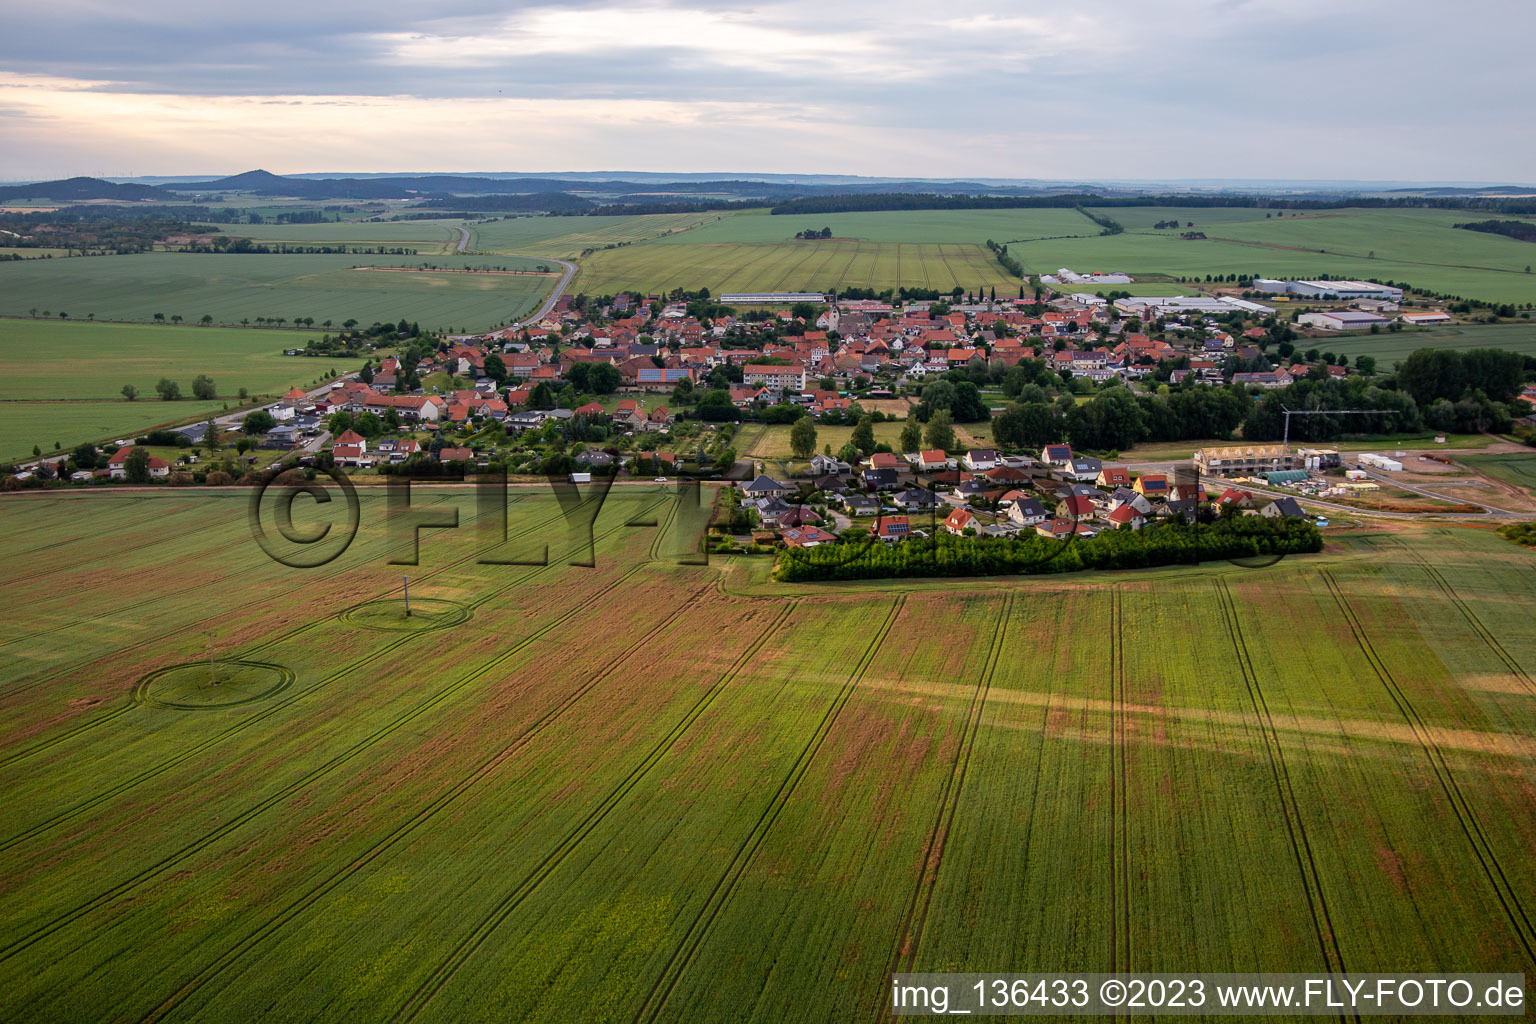 Aerial view of From the south in the district Warnstedt in Thale in the state Saxony-Anhalt, Germany